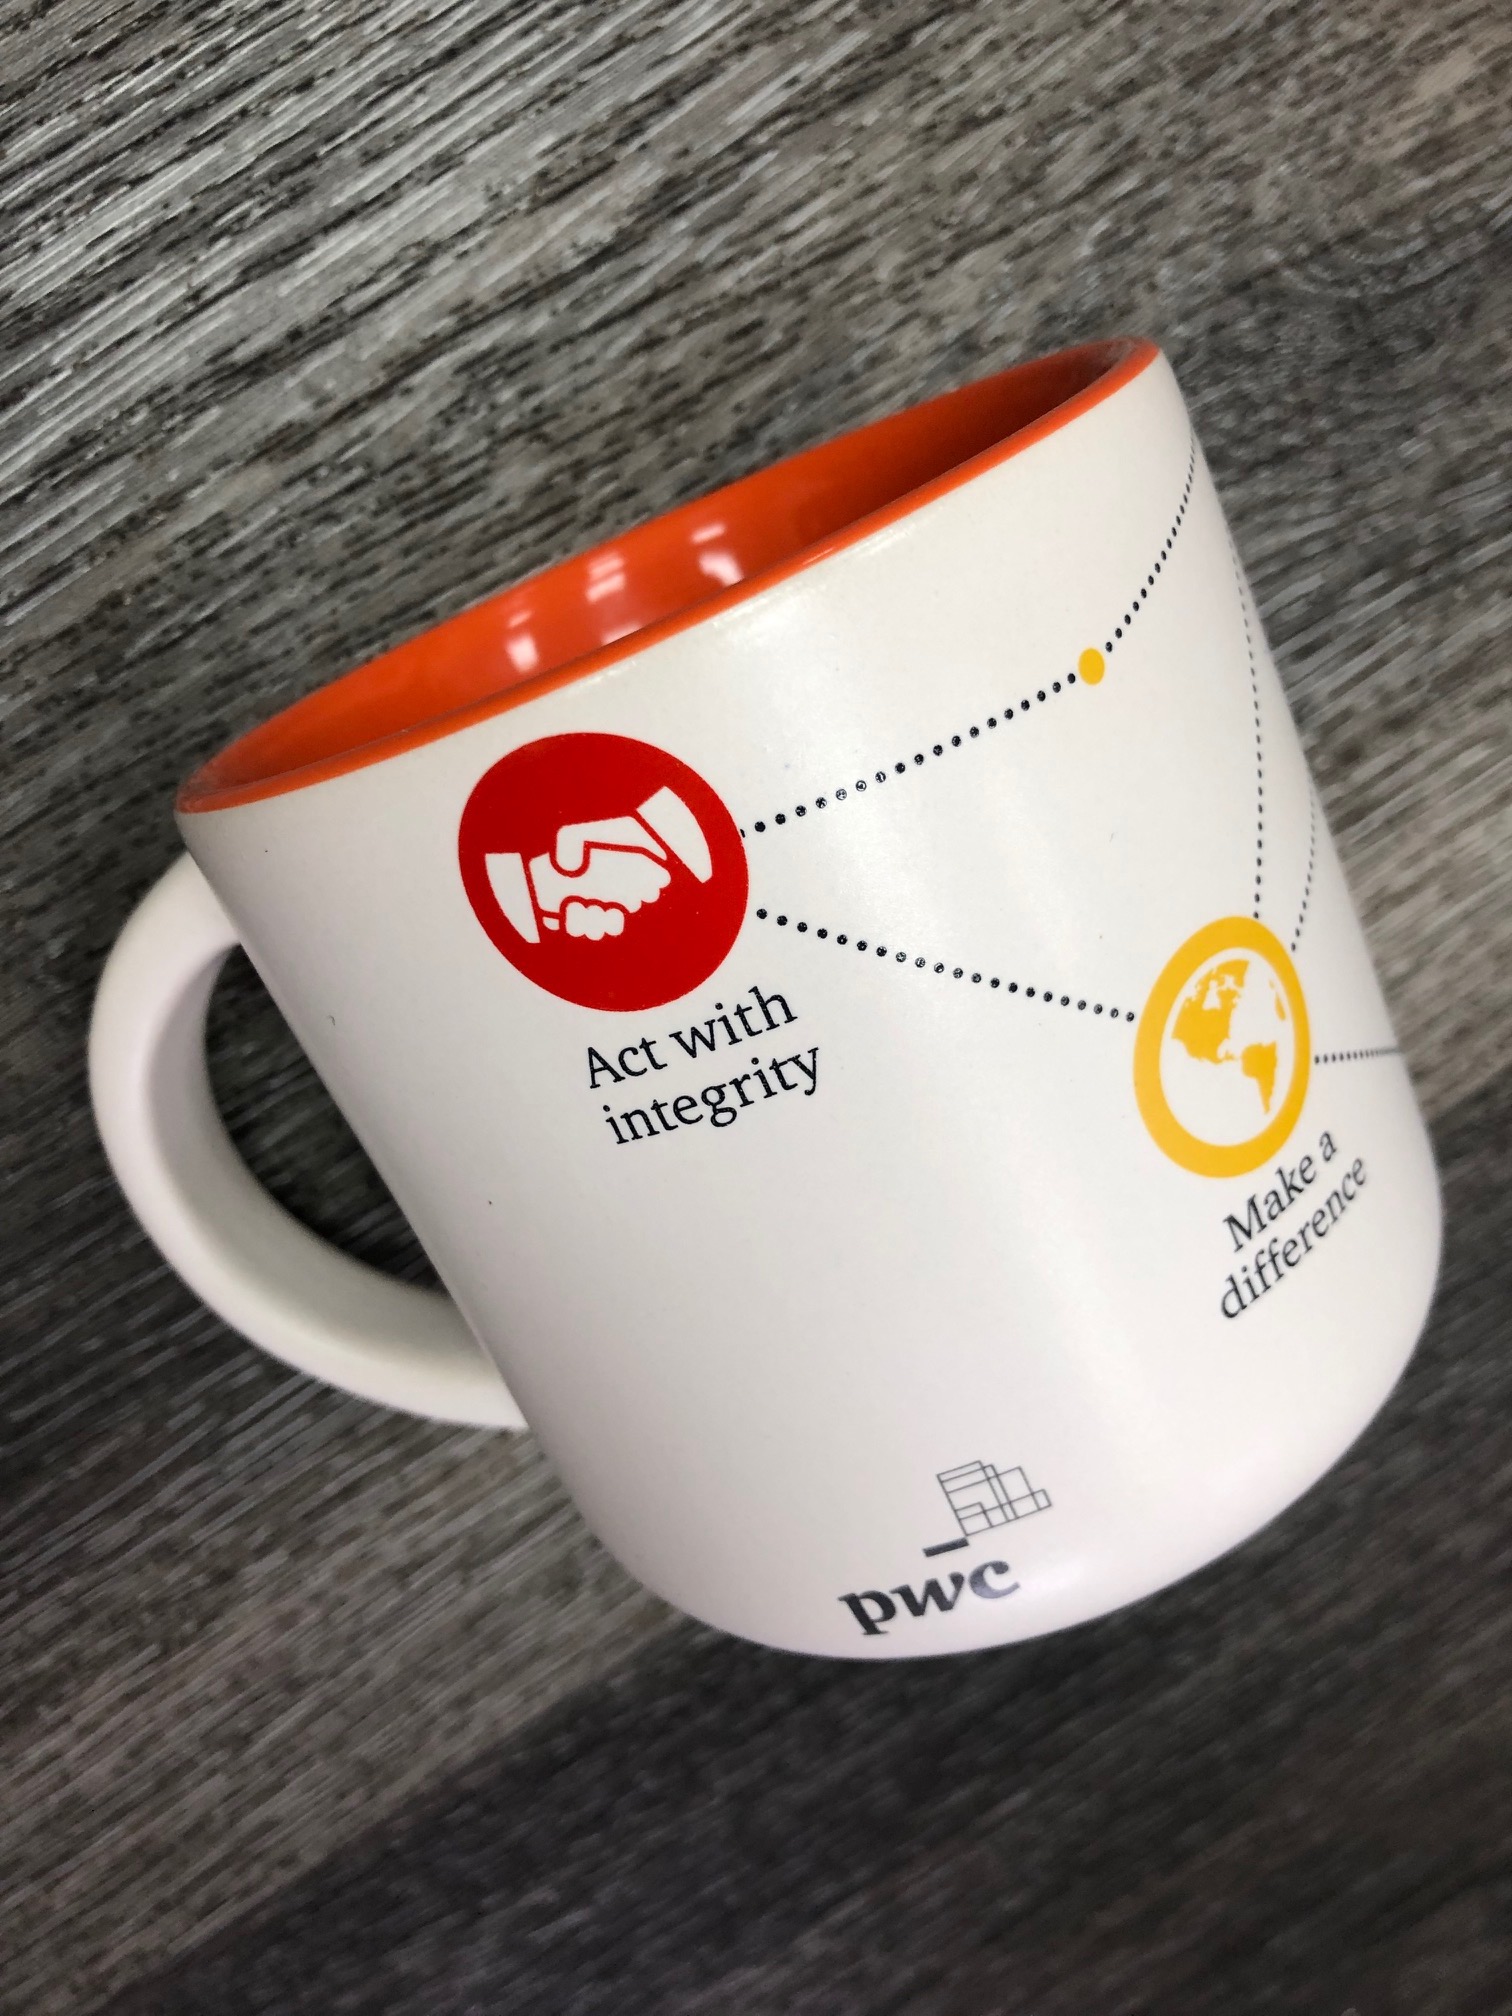 Branded cups (any pictures, graphics, logos)